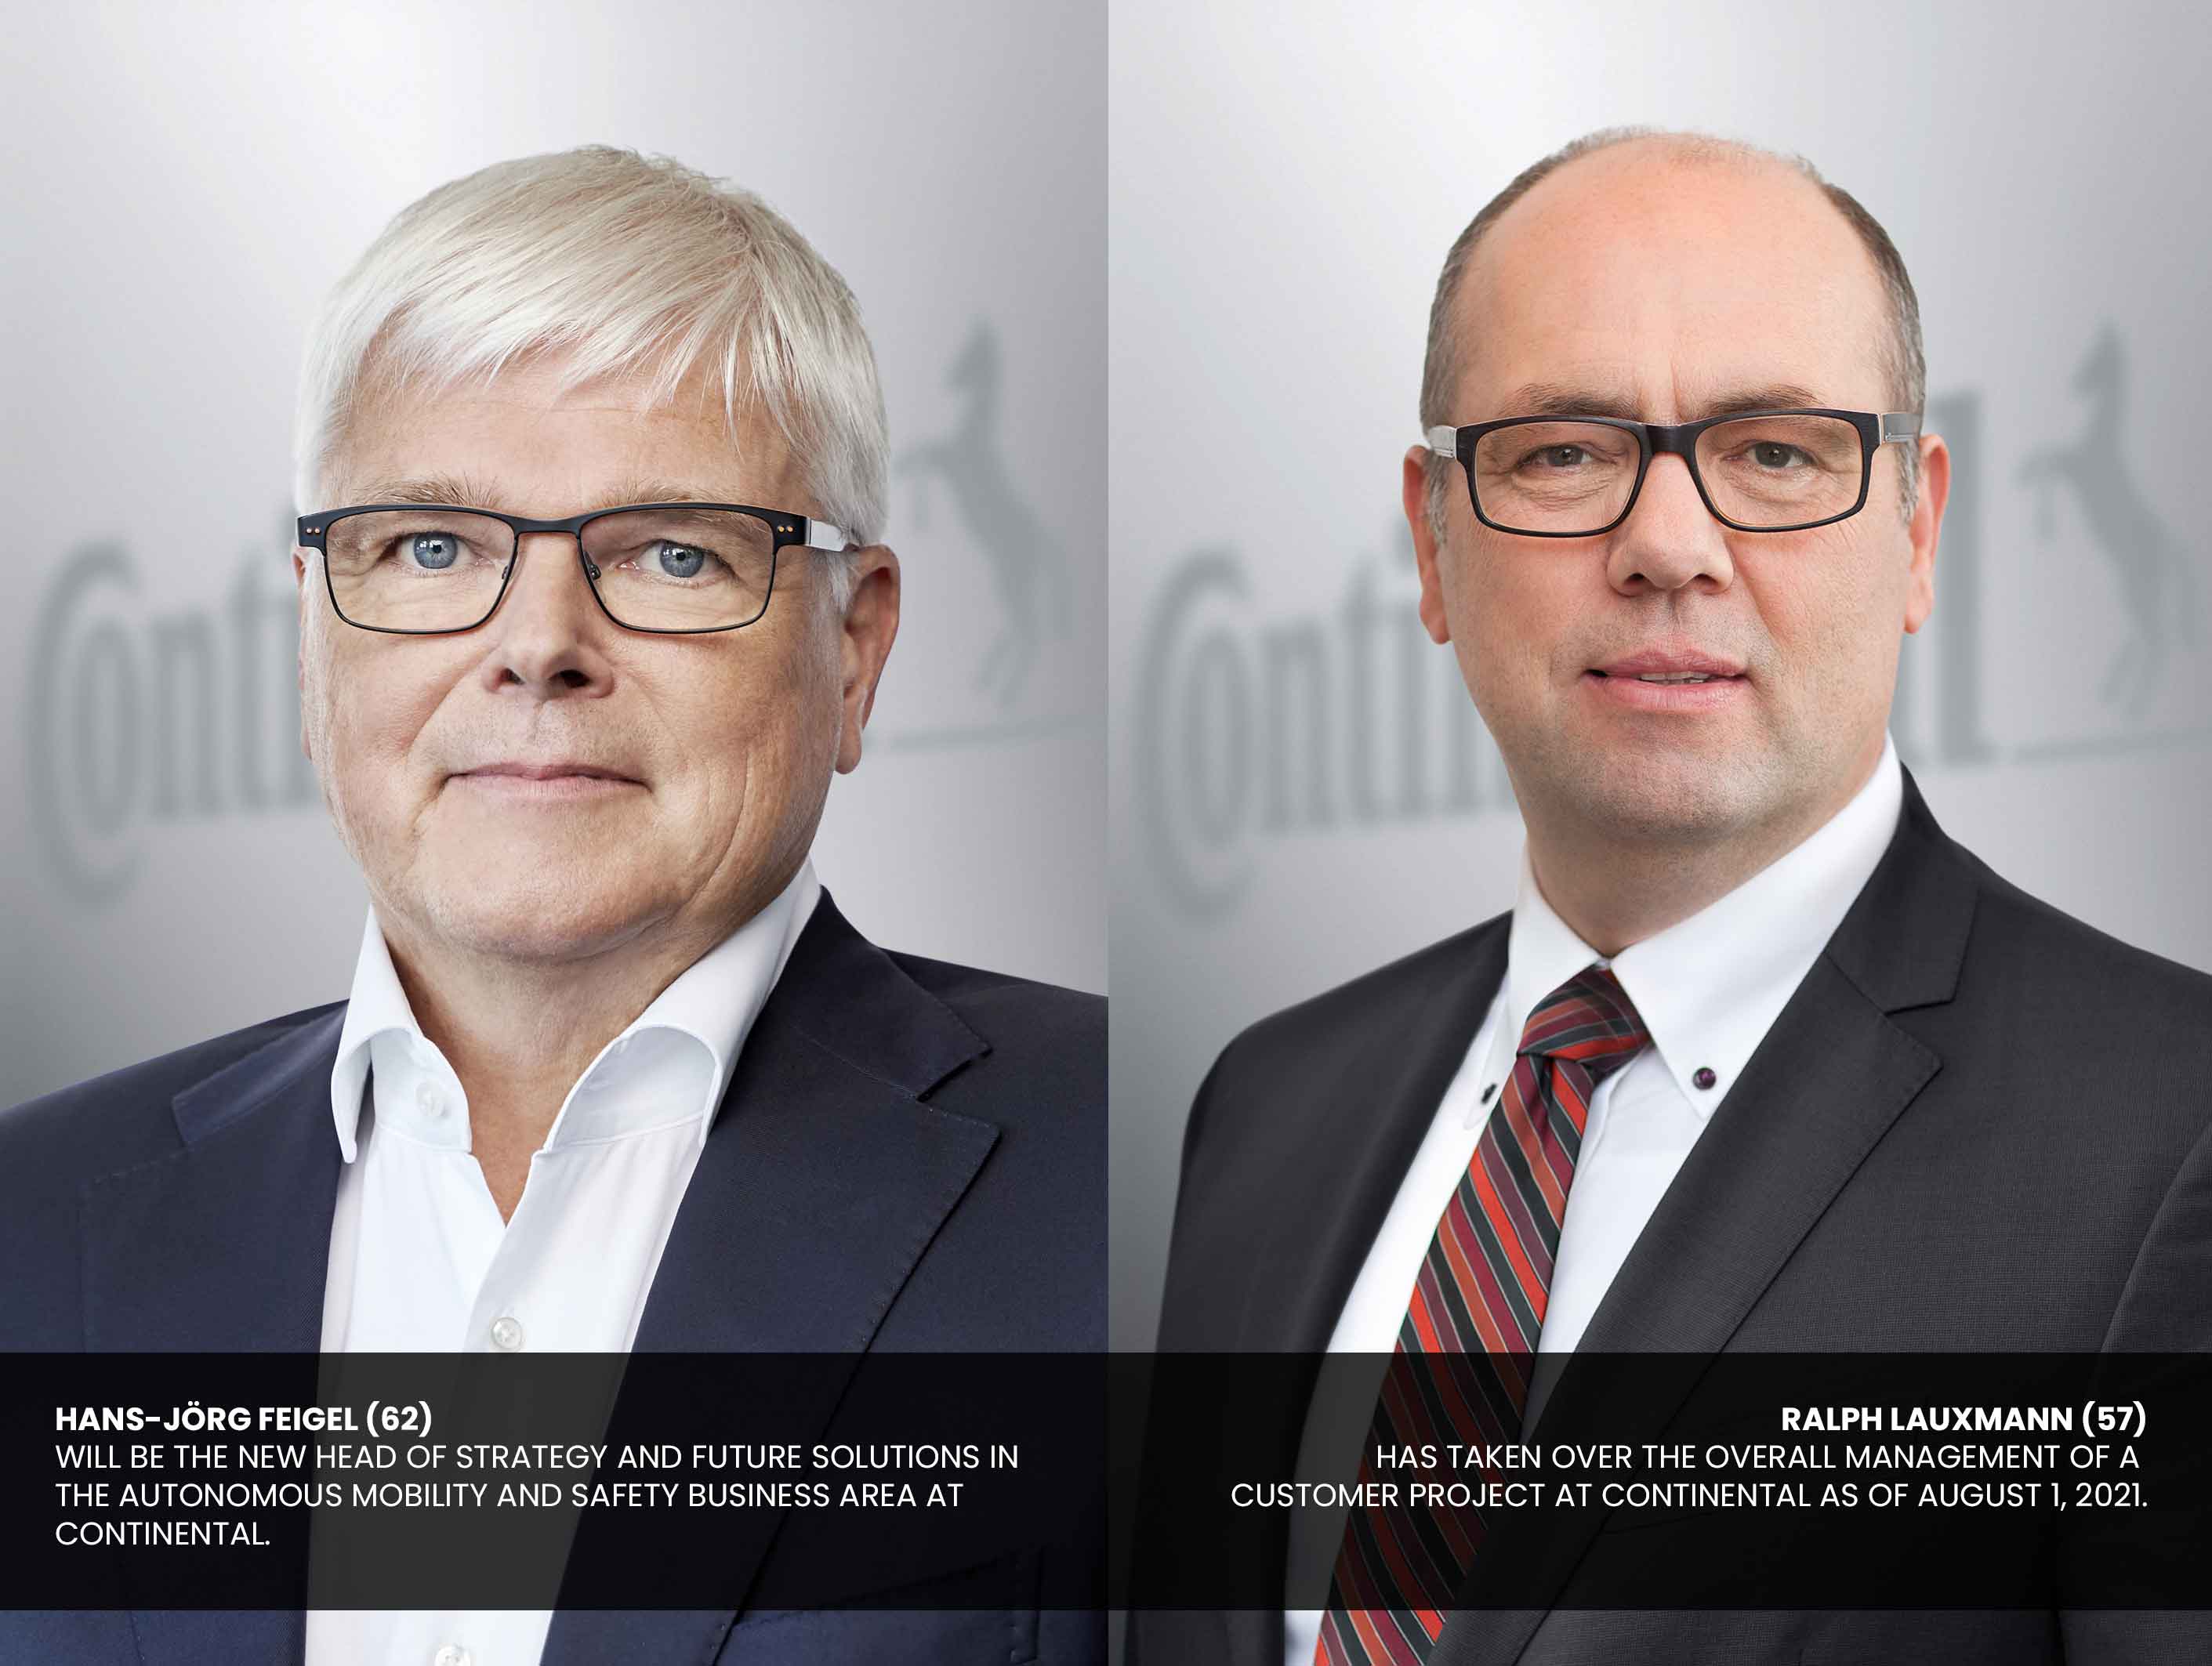 Change in the Management Team of Continental’s Autonomous Mobility and Safety Business Area